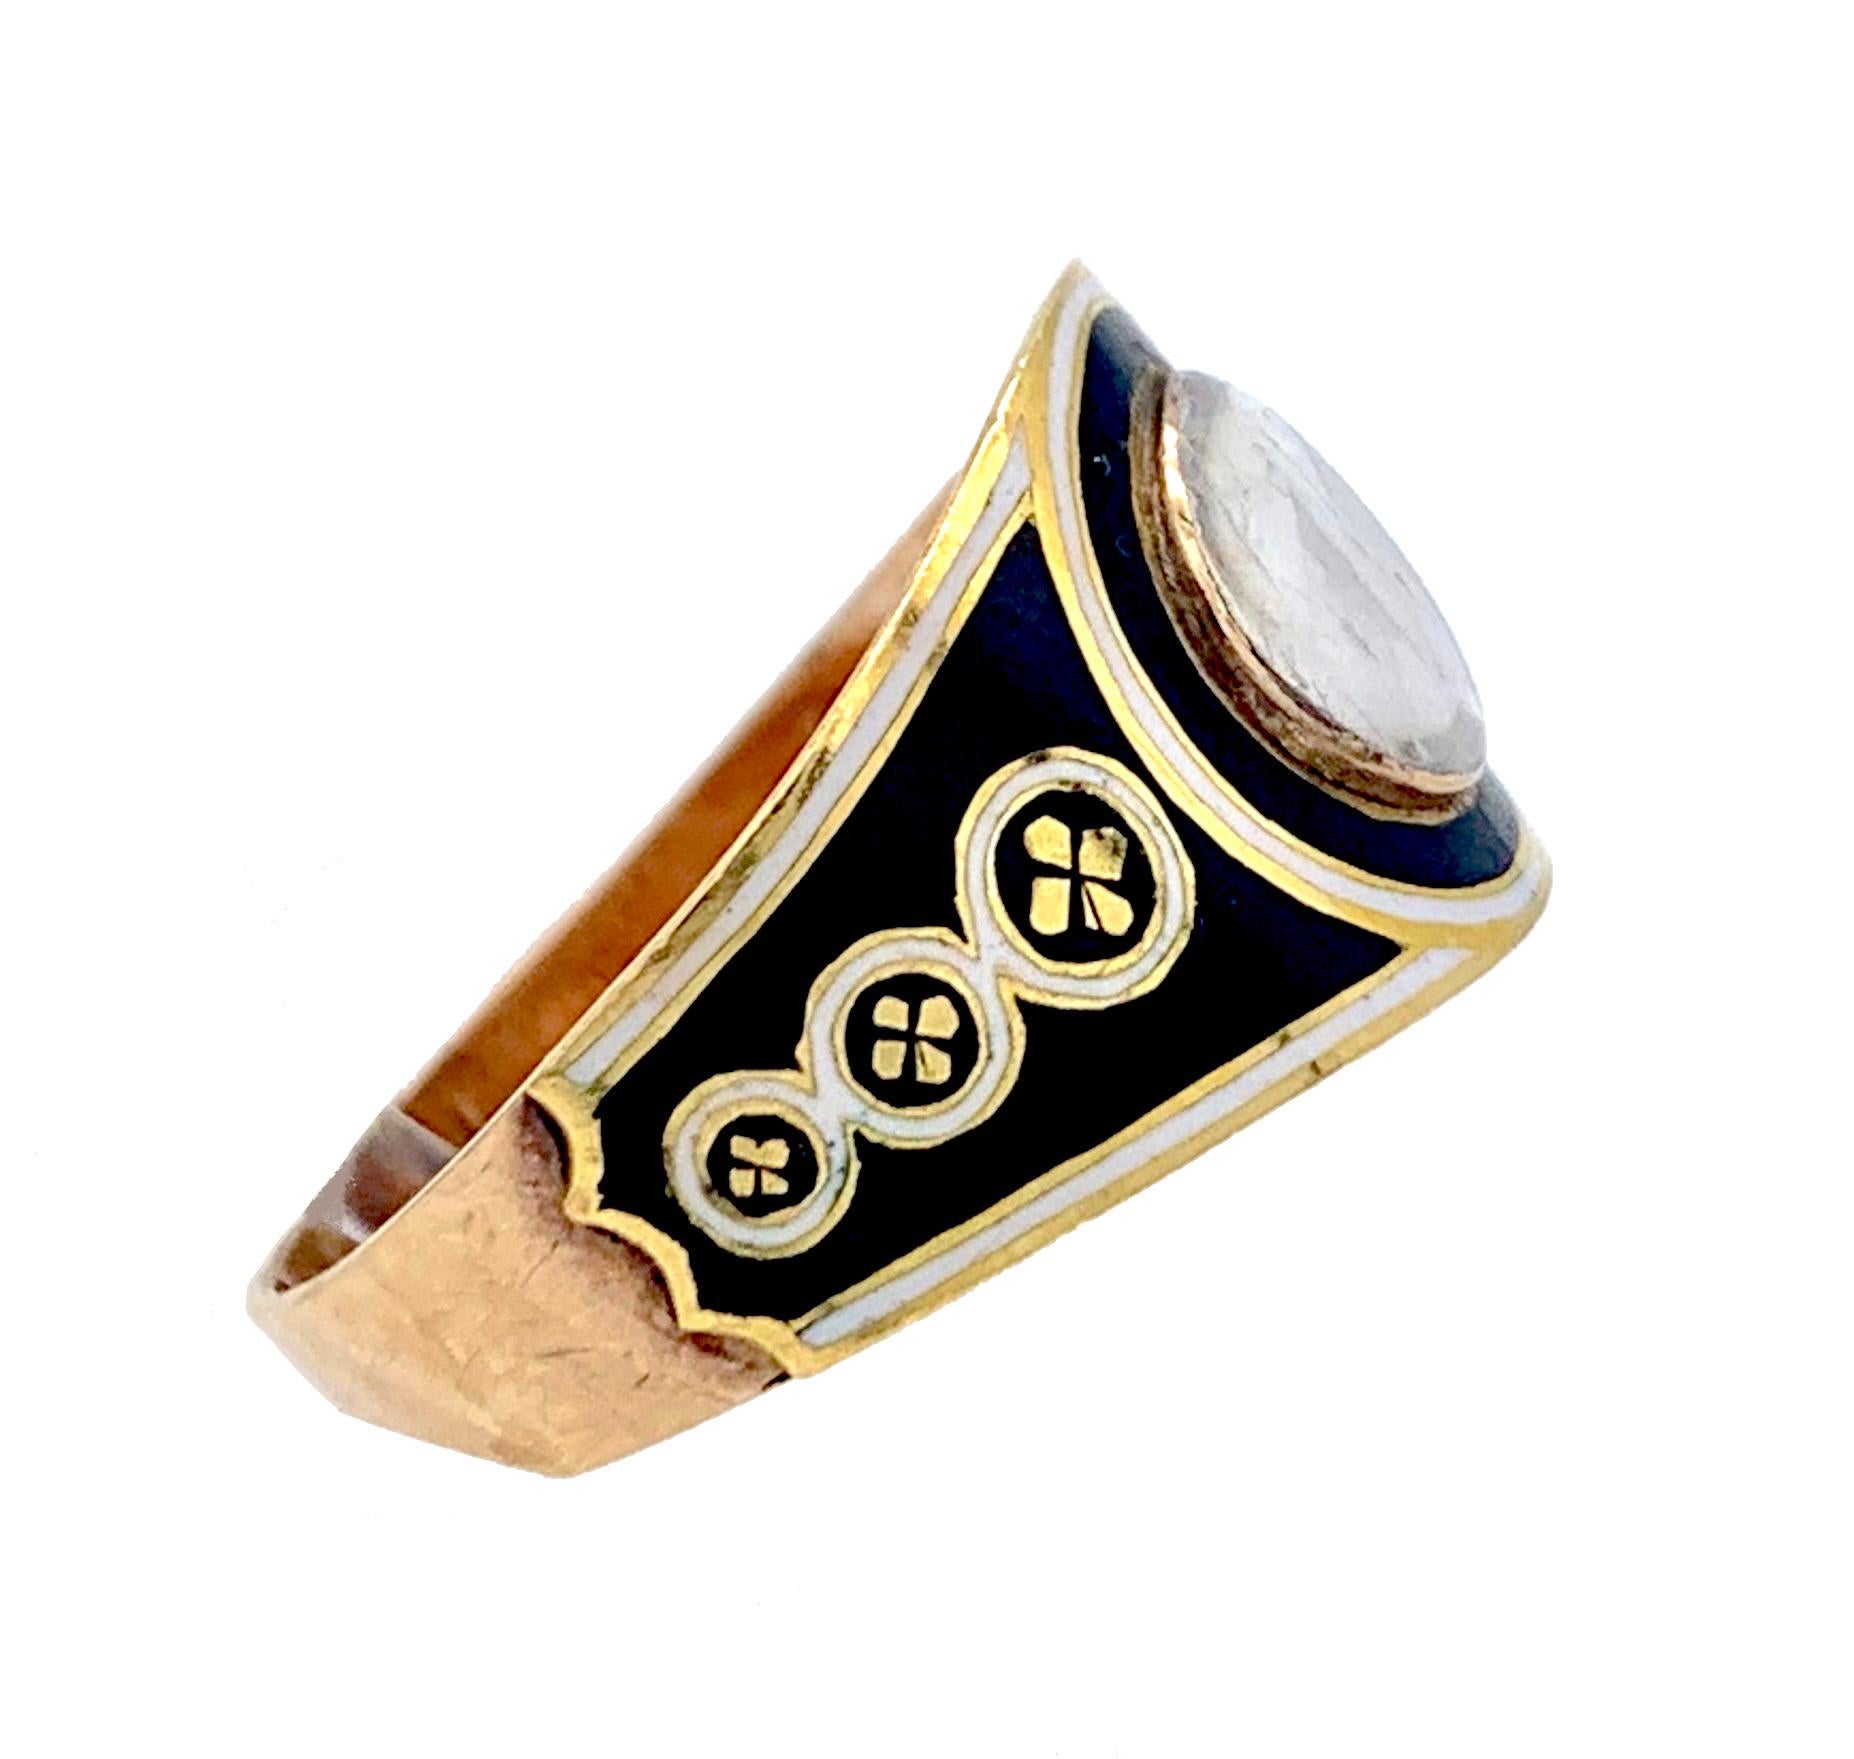  This elegant Georgian mourning ring was made in England in 1800 ca out of 15 karat yellow and rose gold and is decorated with black and white enamel. The front of the ring is designed as a large black and white circle with a domed glass in the